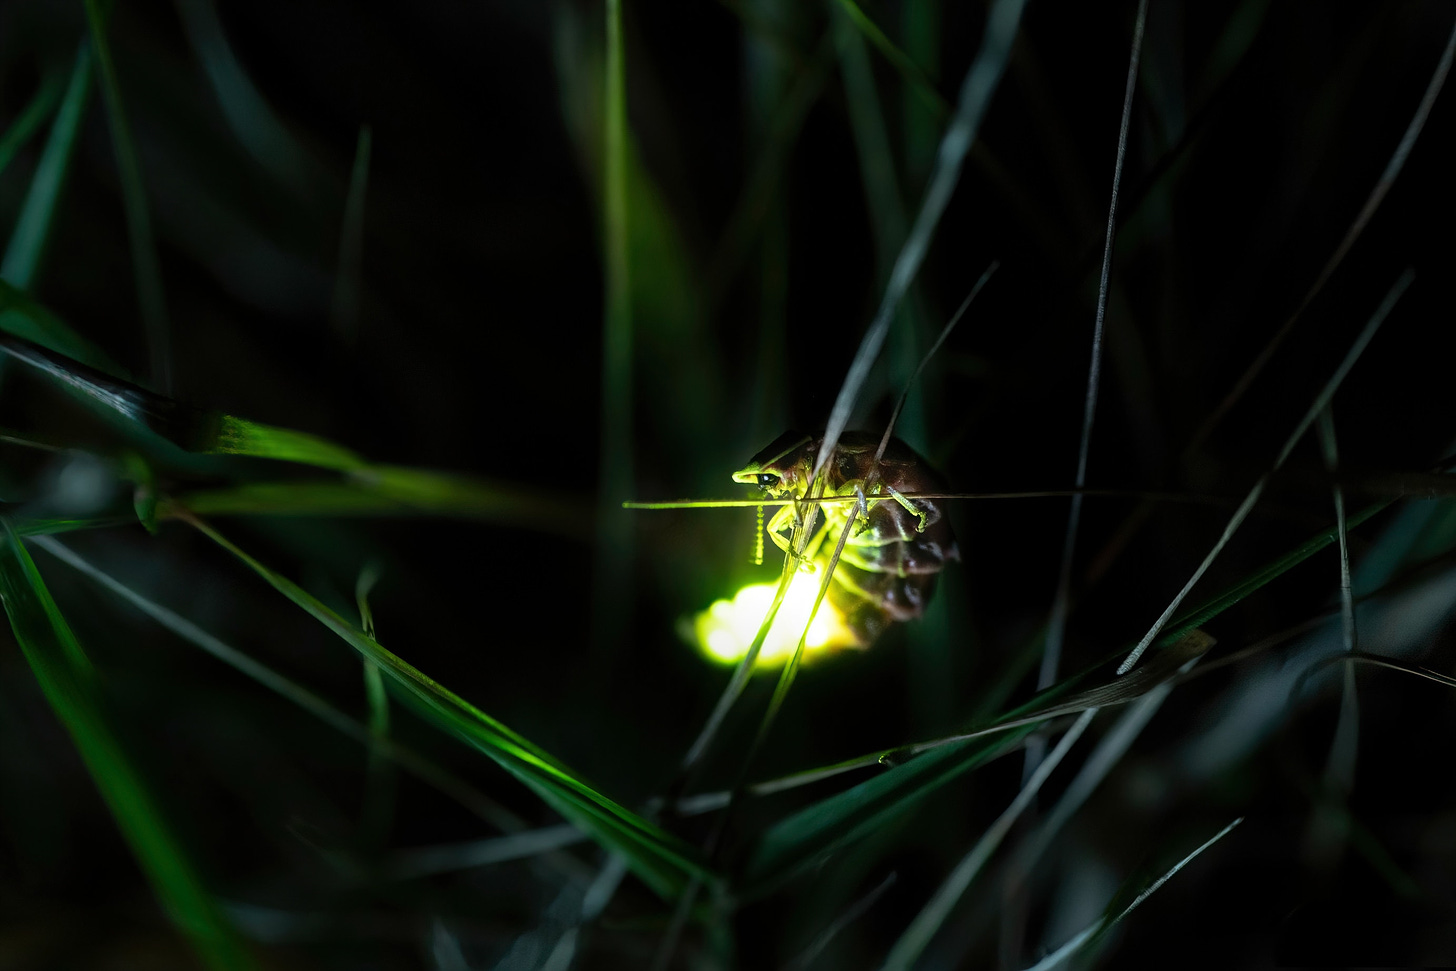 A firefly, perched on a blade of grass, lights up.